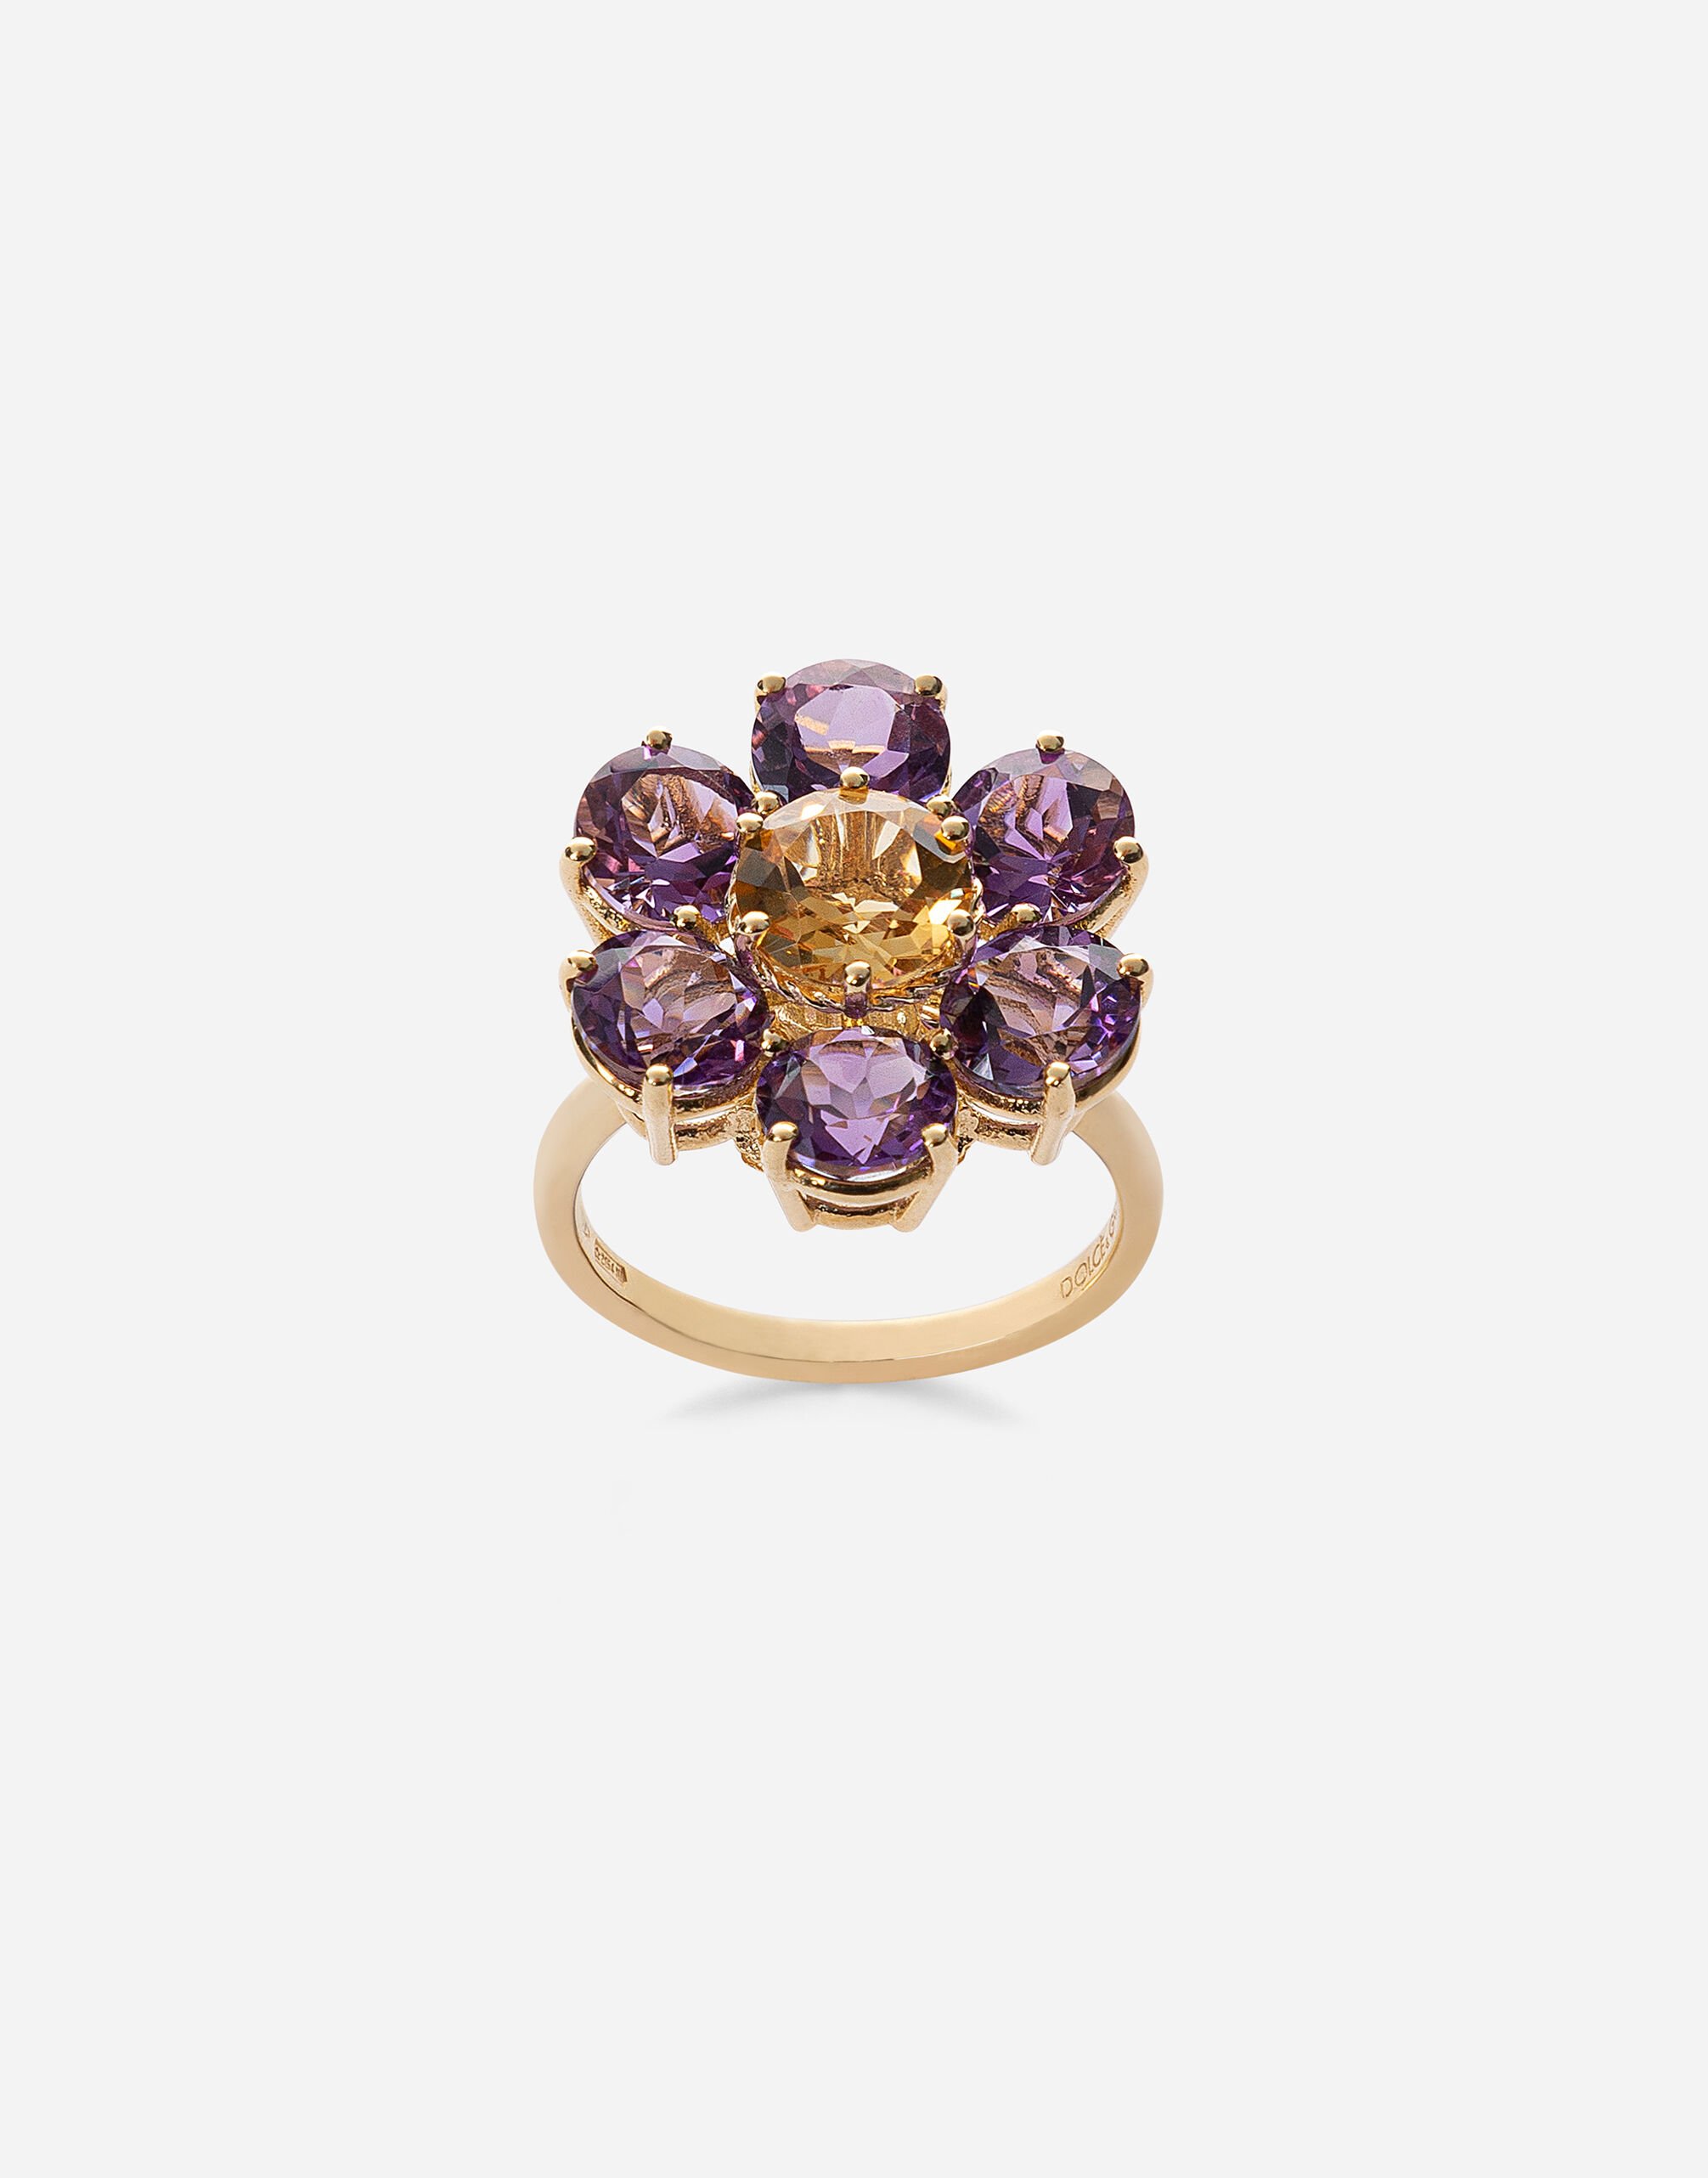 Dolce & Gabbana Spring ring in yellow 18kt gold with amethyst floral motif Gold WFHK2GWSAPB